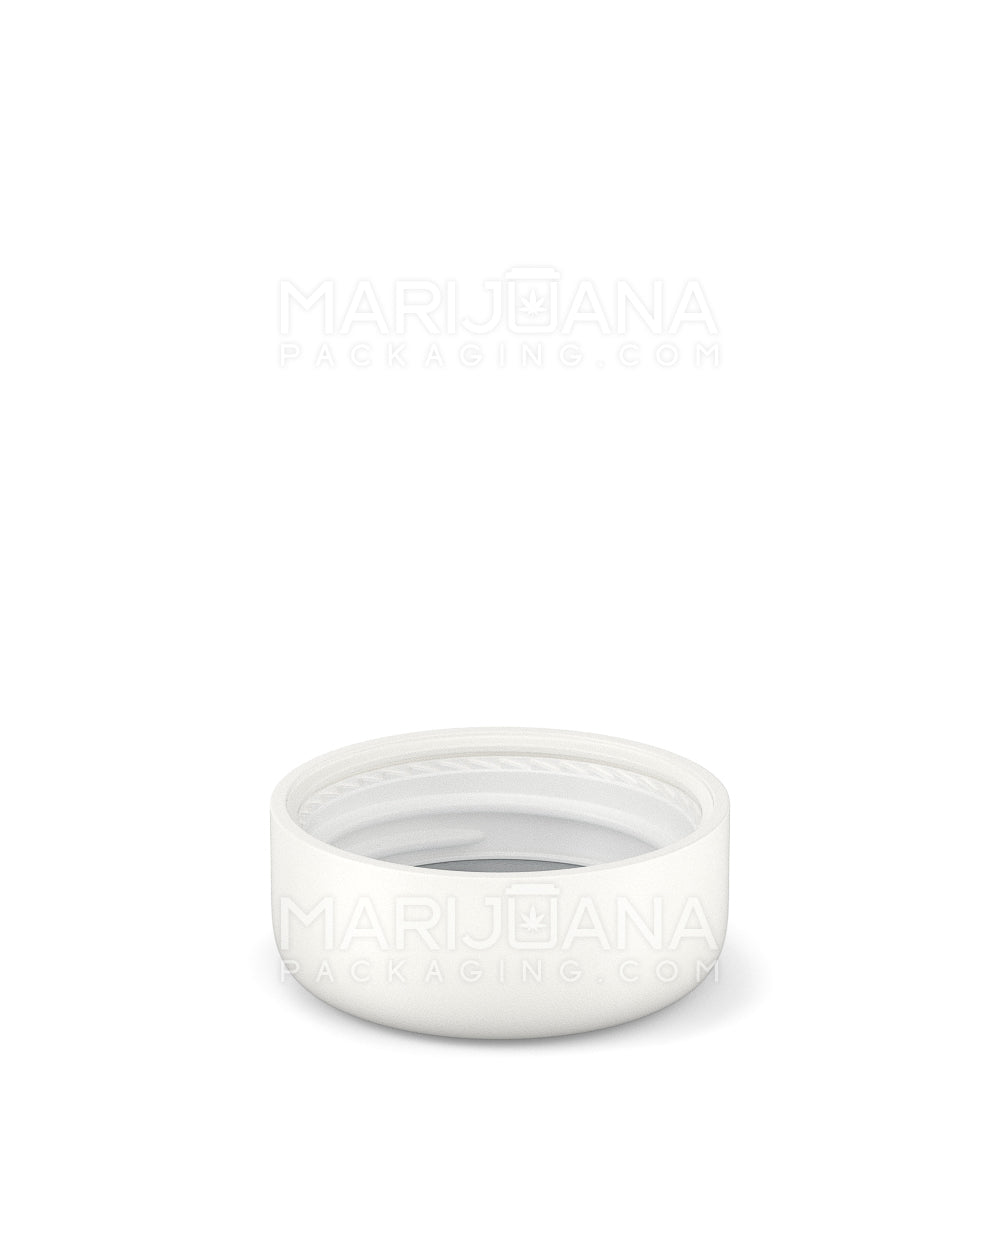 POLLEN GEAR | HiLine Child Resistant Smooth Push Down & Turn Plastic Round Caps w/ 3-Layer Liner | 29mm - Matte White - 308 Count - 4